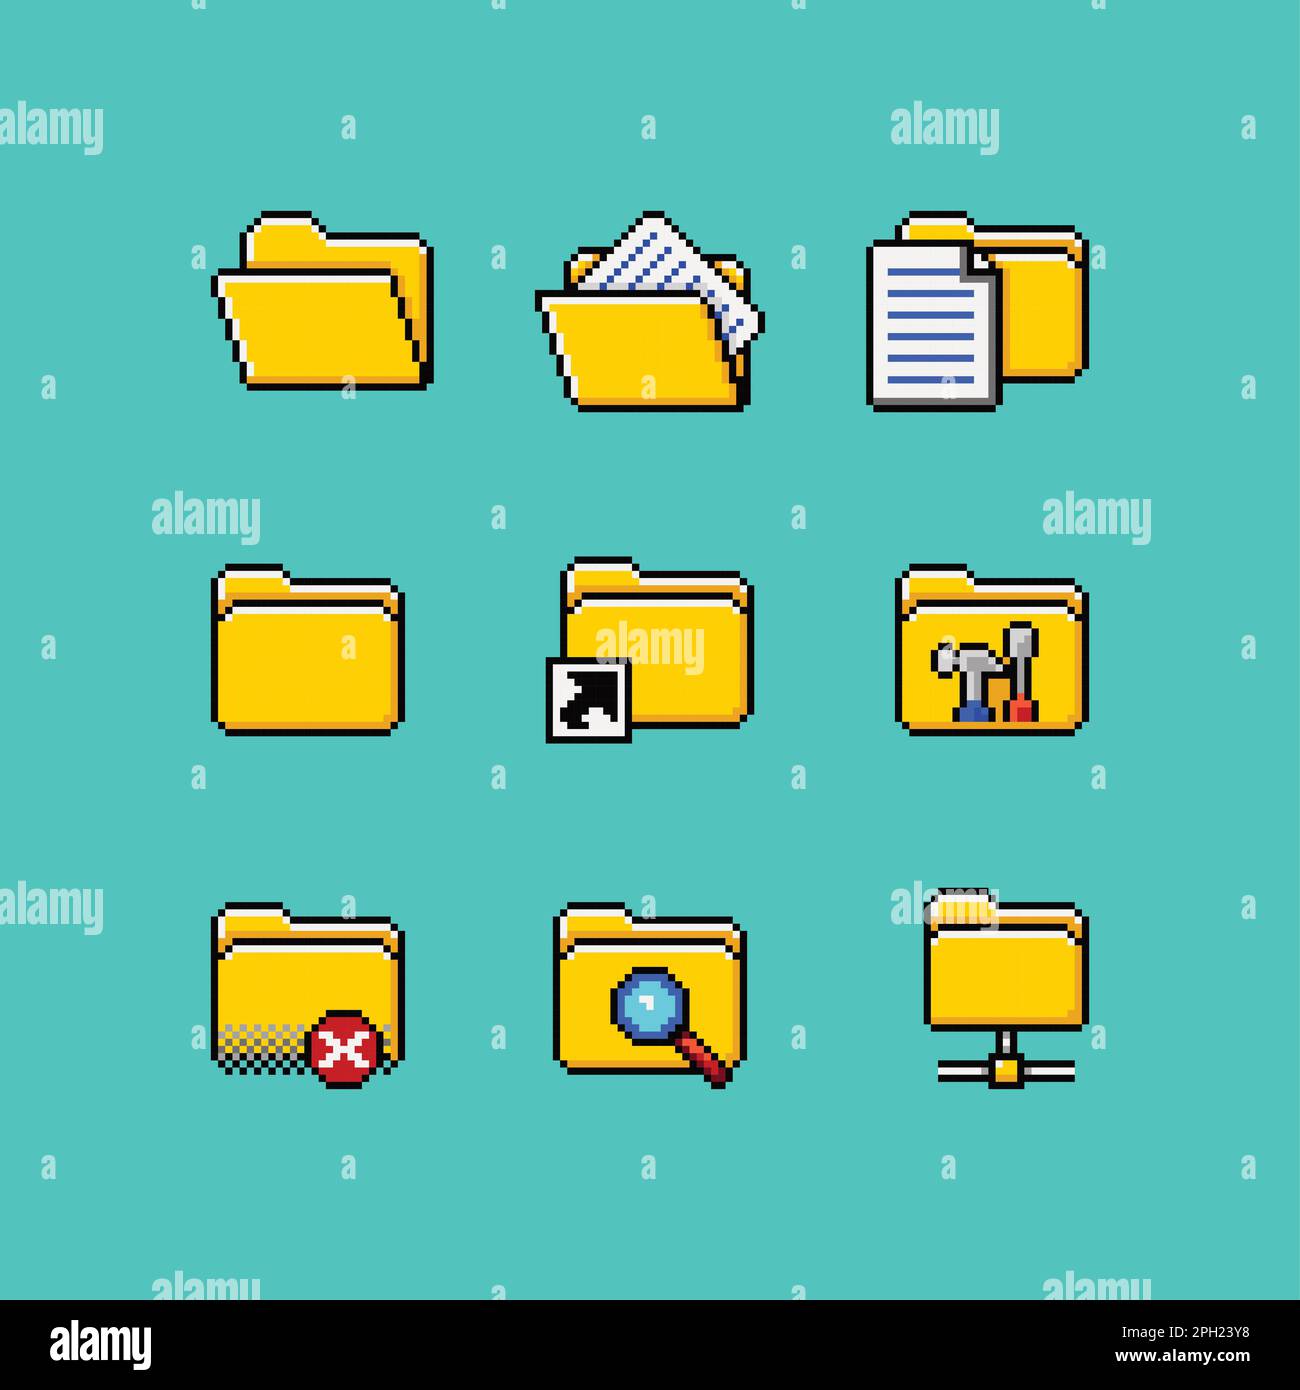 Vector pixel art retro computer PC user interface icon set. directory filesystem folder, document, tools, search, network storage. 8 bit icon asset Stock Vector